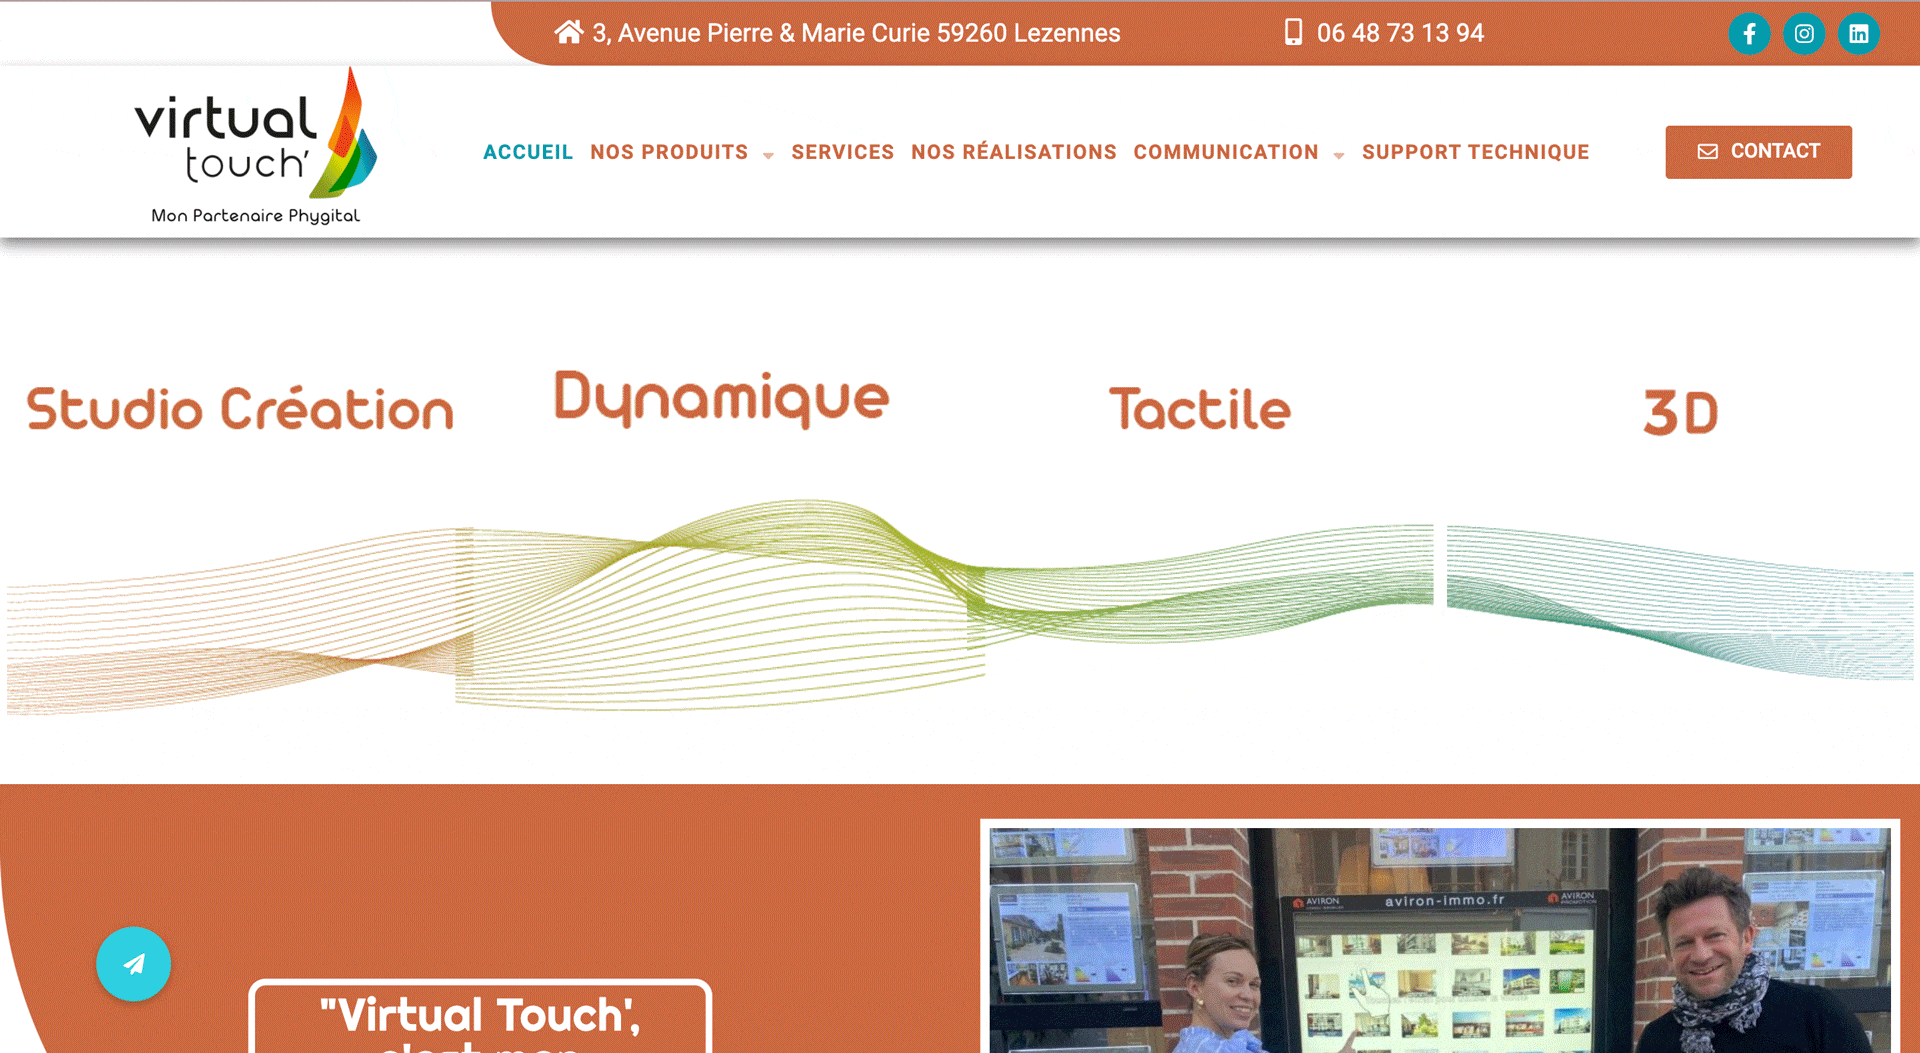 Site Virtual Touch